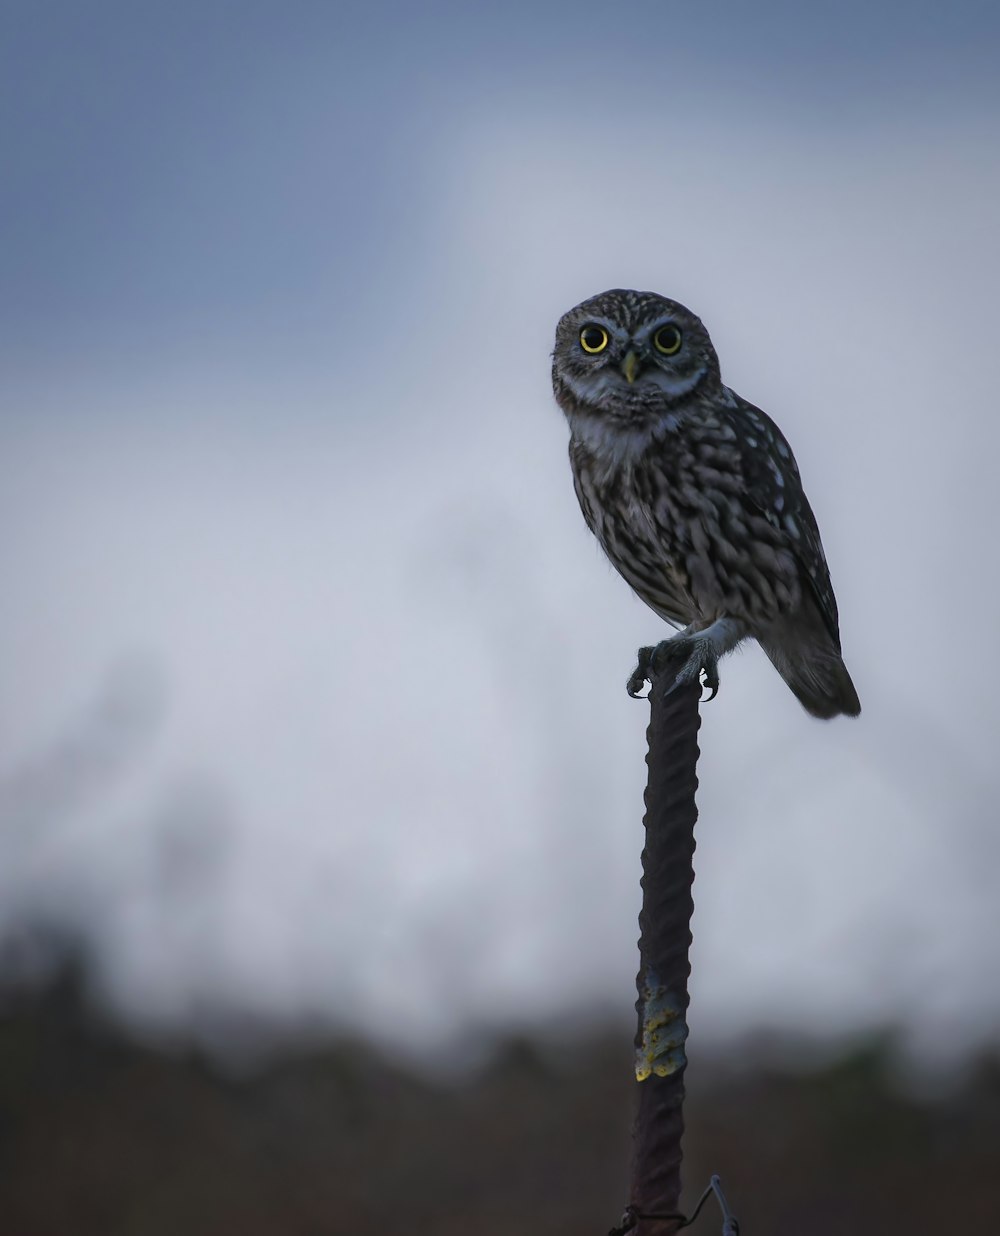 a small owl sitting on top of a metal pole